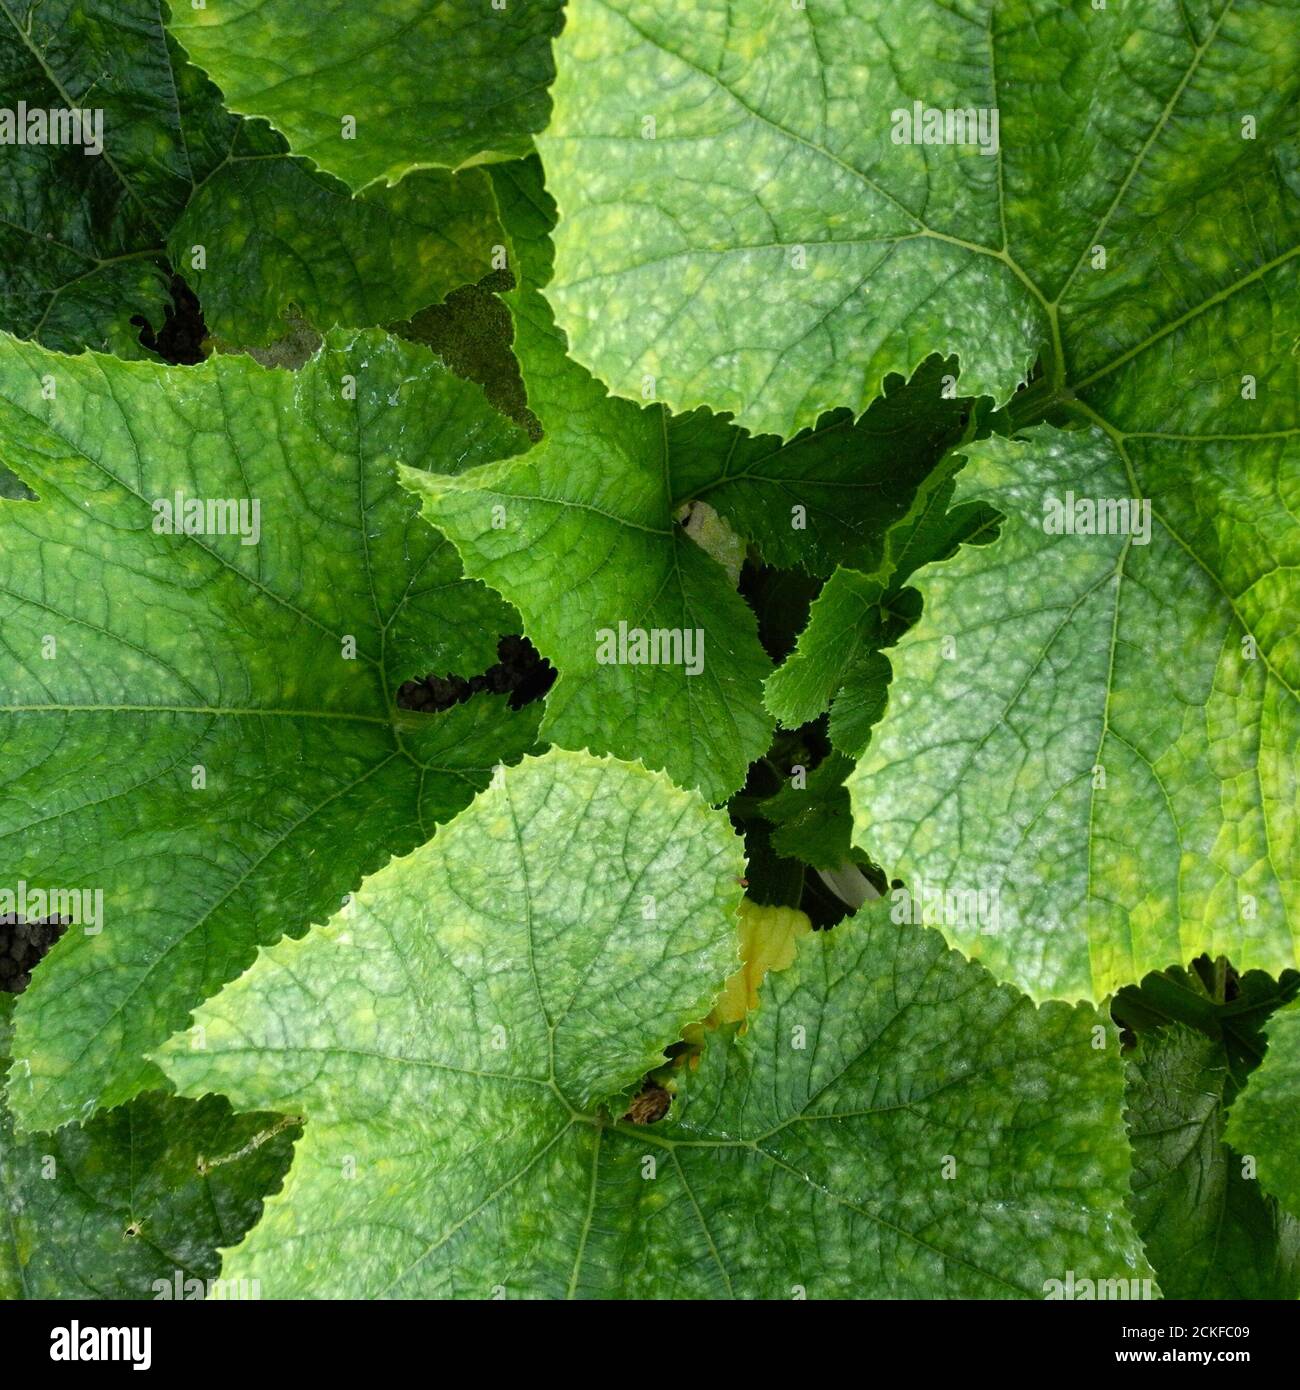 This image shows the early stage of Powdery Mildew affecting the leaves of a PUMPKIN. Powdery mildew is a fungal disease that affects a wide range of plants. Powdery mildew diseases are caused by many different species of fungi in the order Erysiphales, with Podosphaera xanthii being the most commonly reported cause. Common on PUMPKINS CUCUMBERS COURGETTES and other members of the SQUASH family. Stock Photo